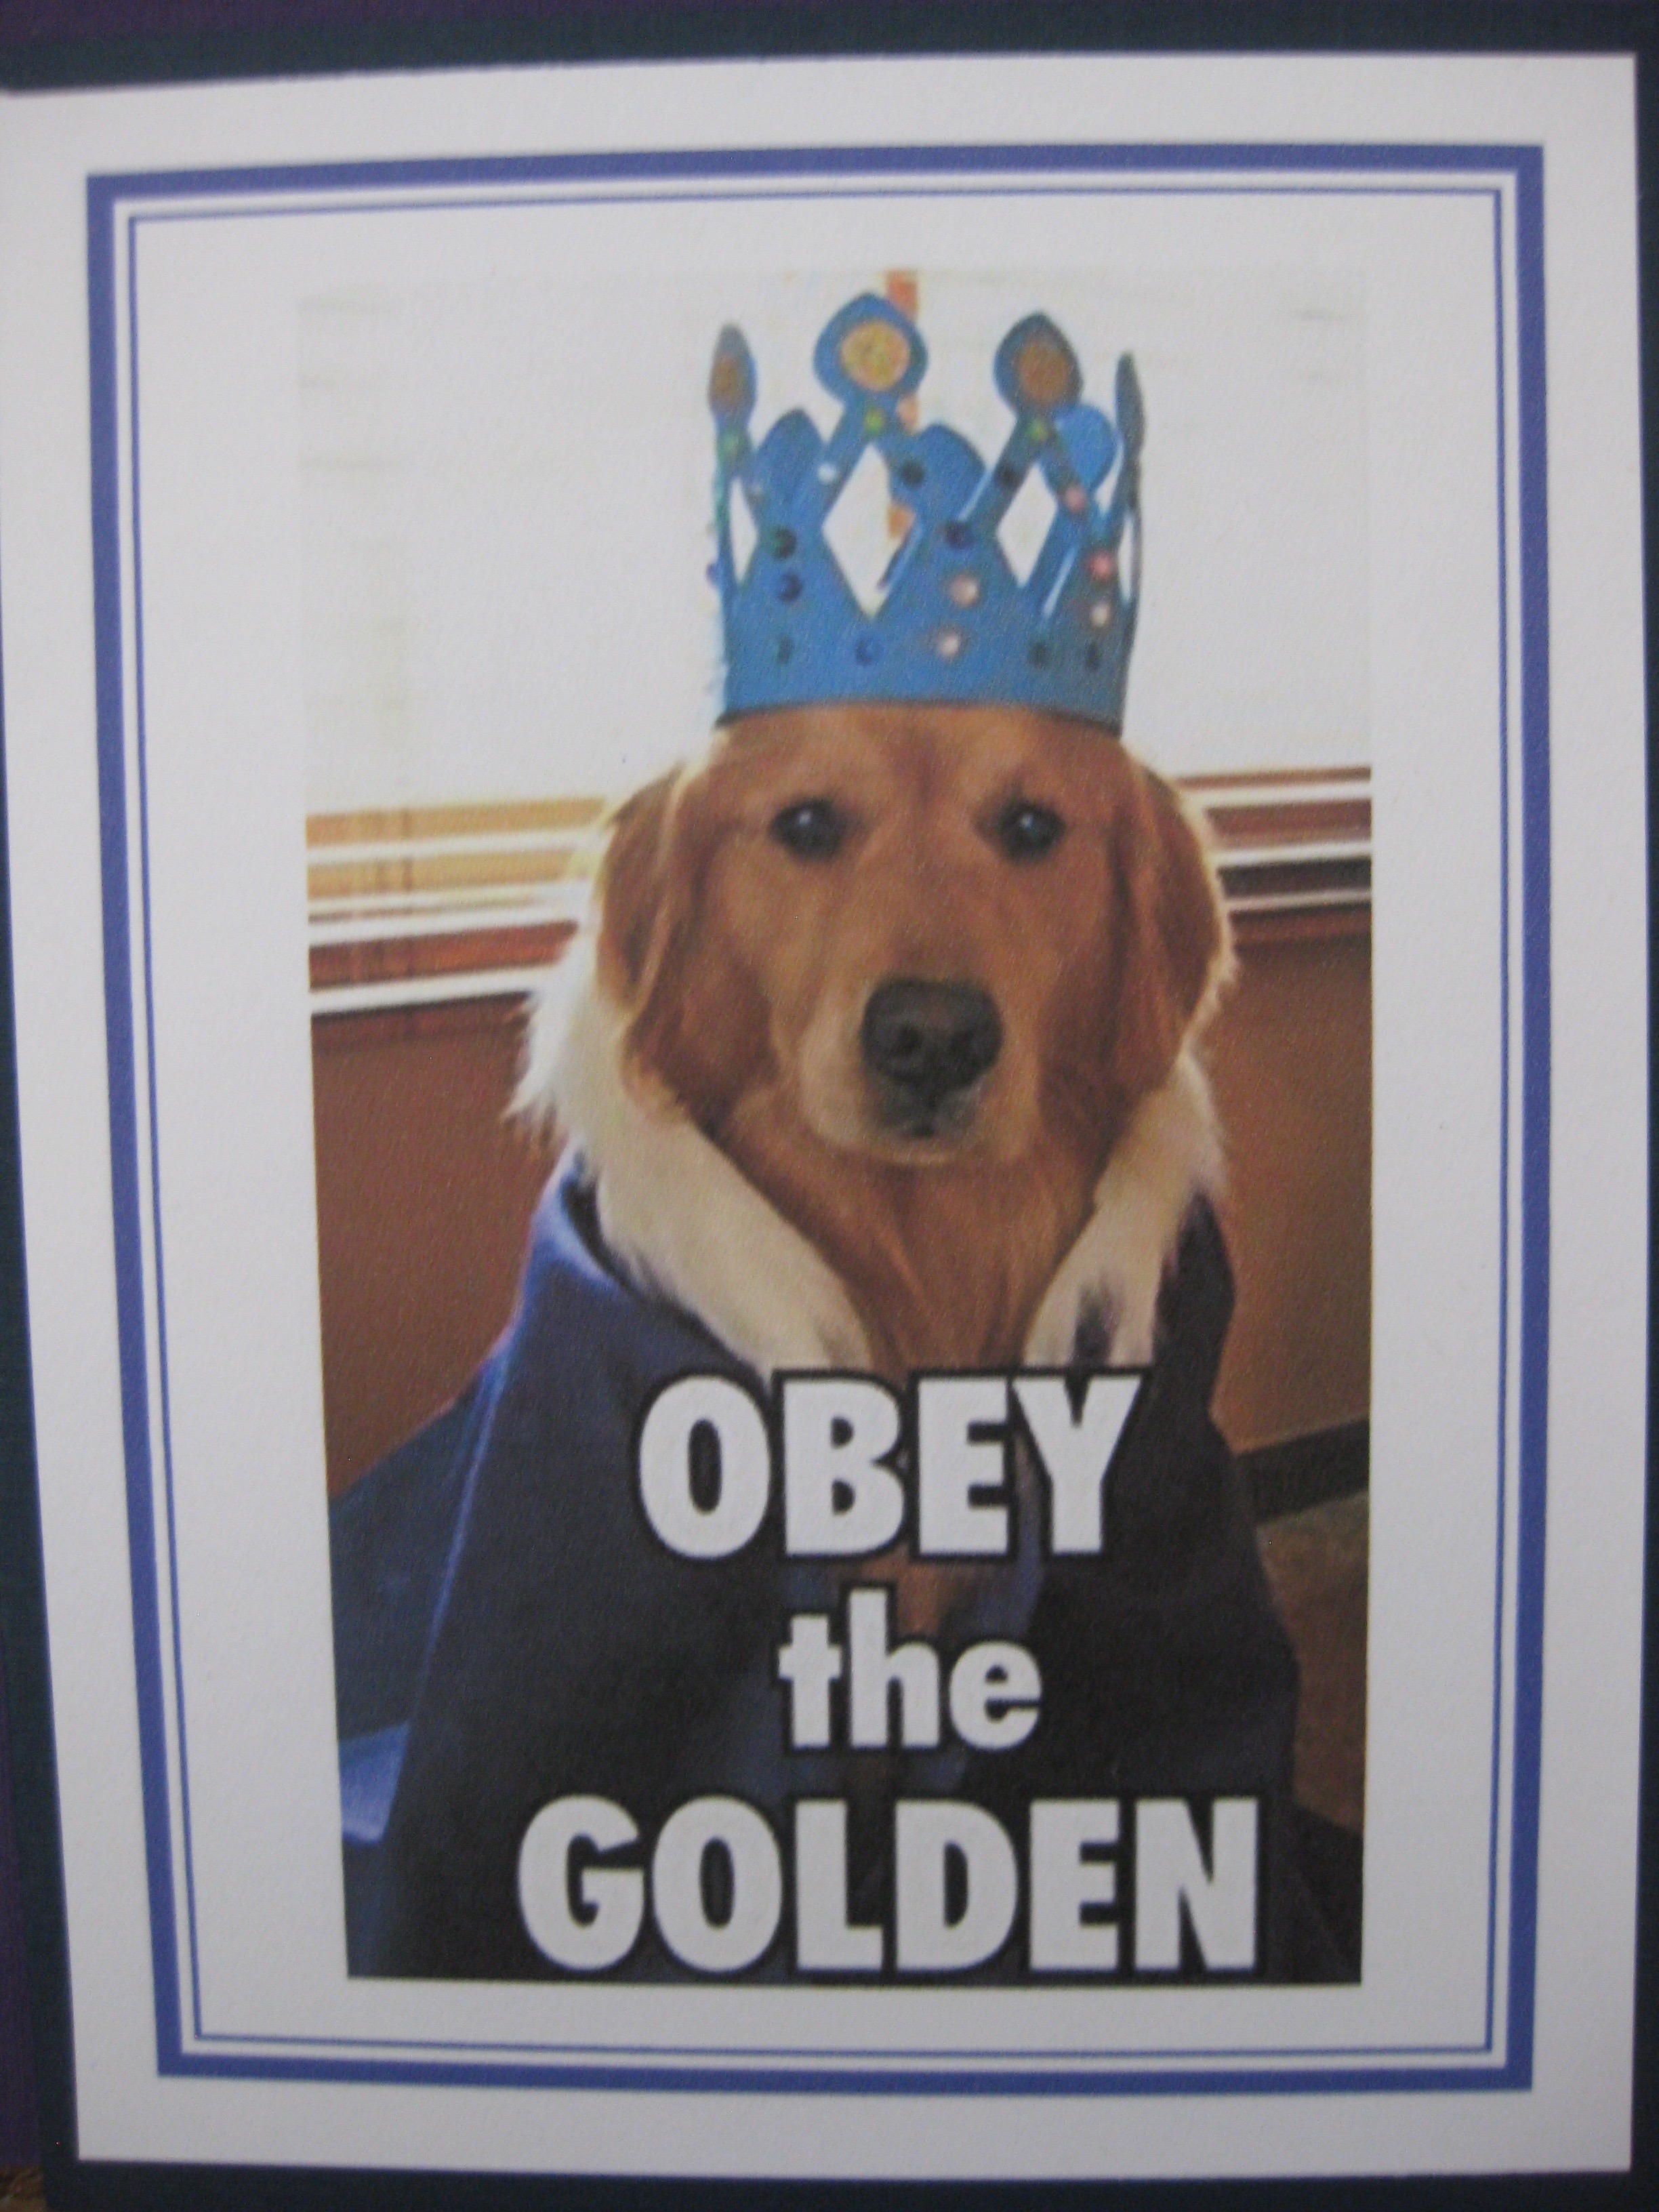 Obey the Golden